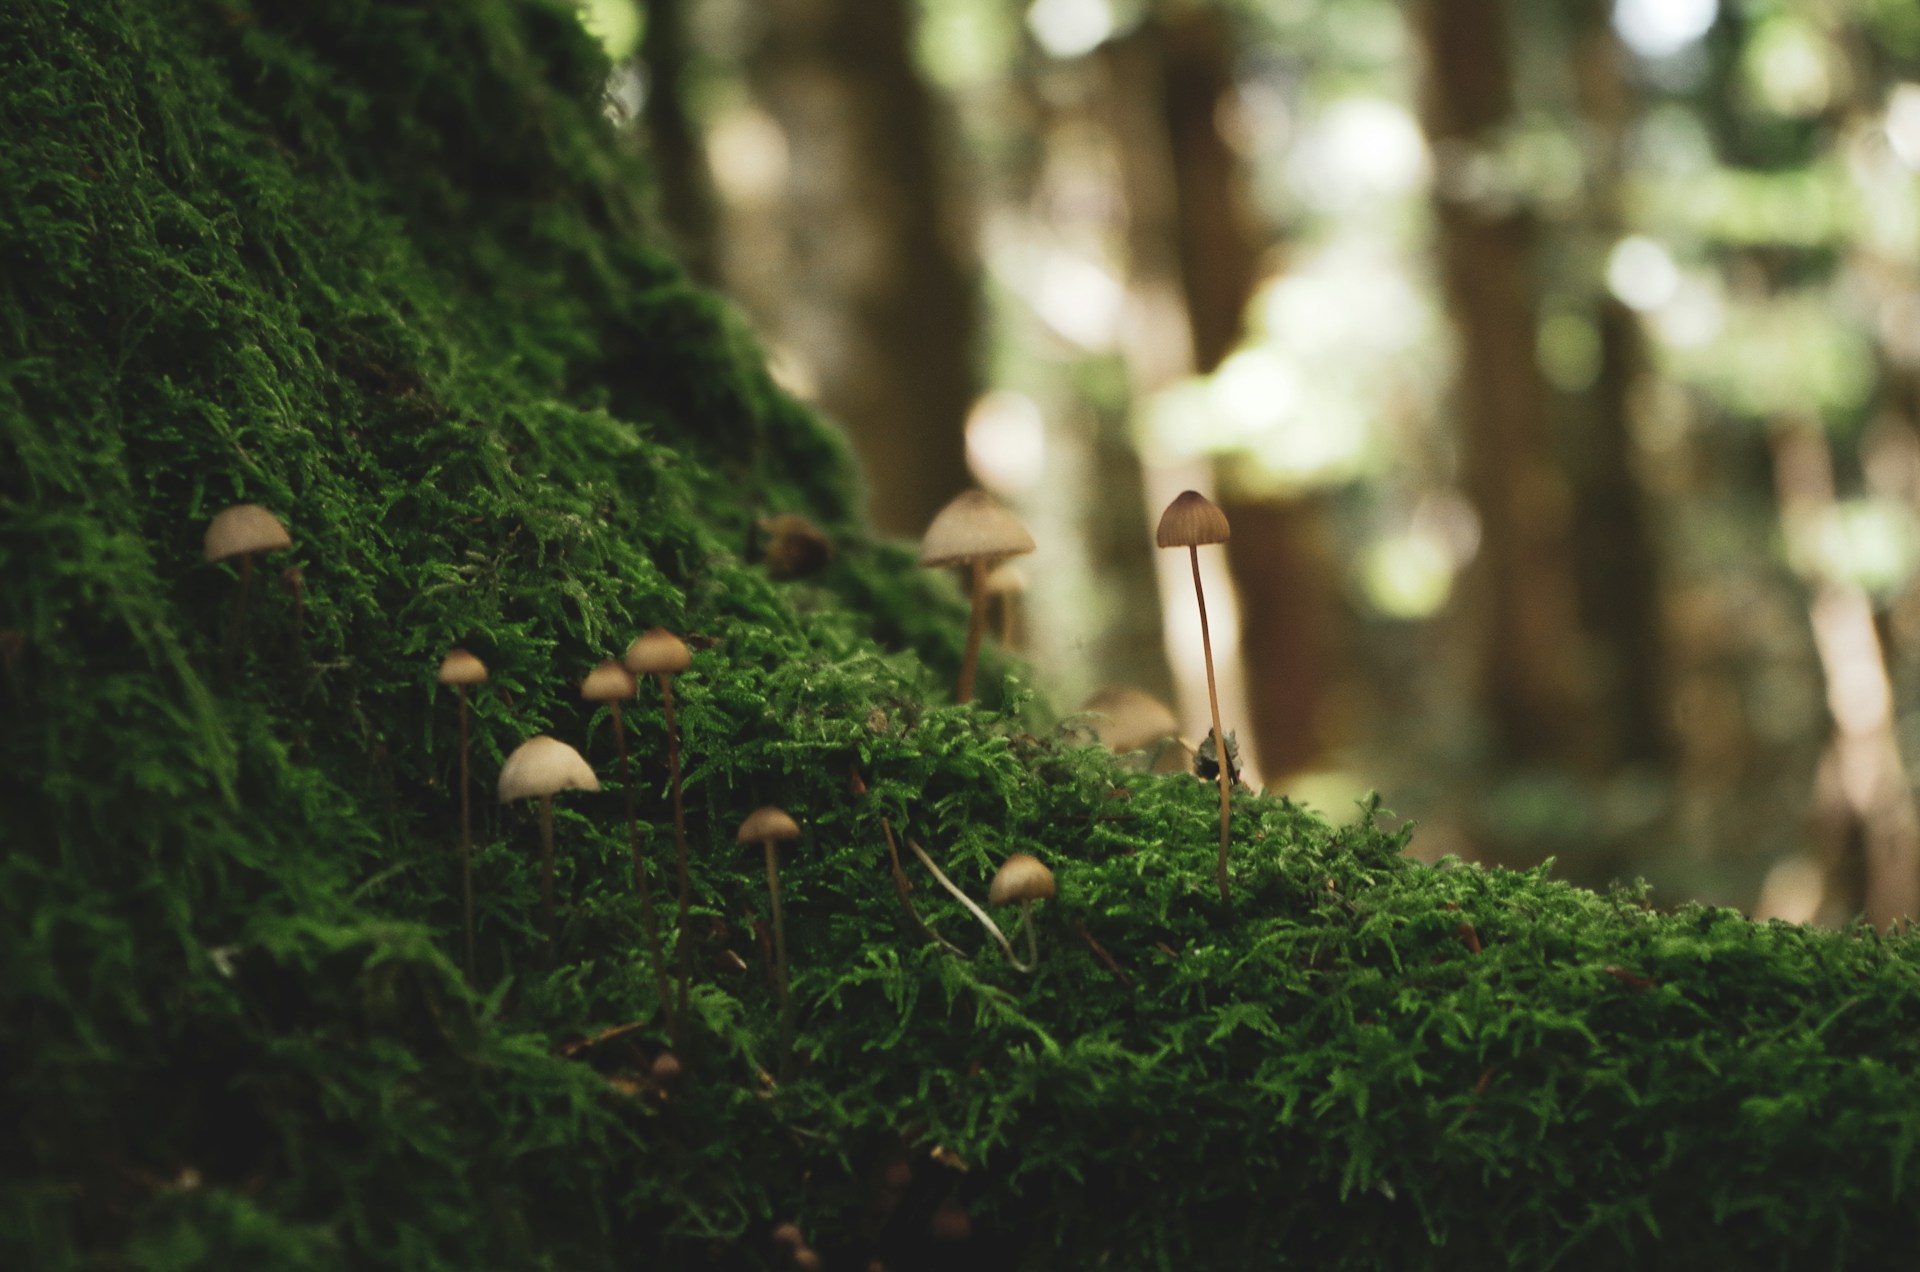 mushrooms growing beside a tree in a forest